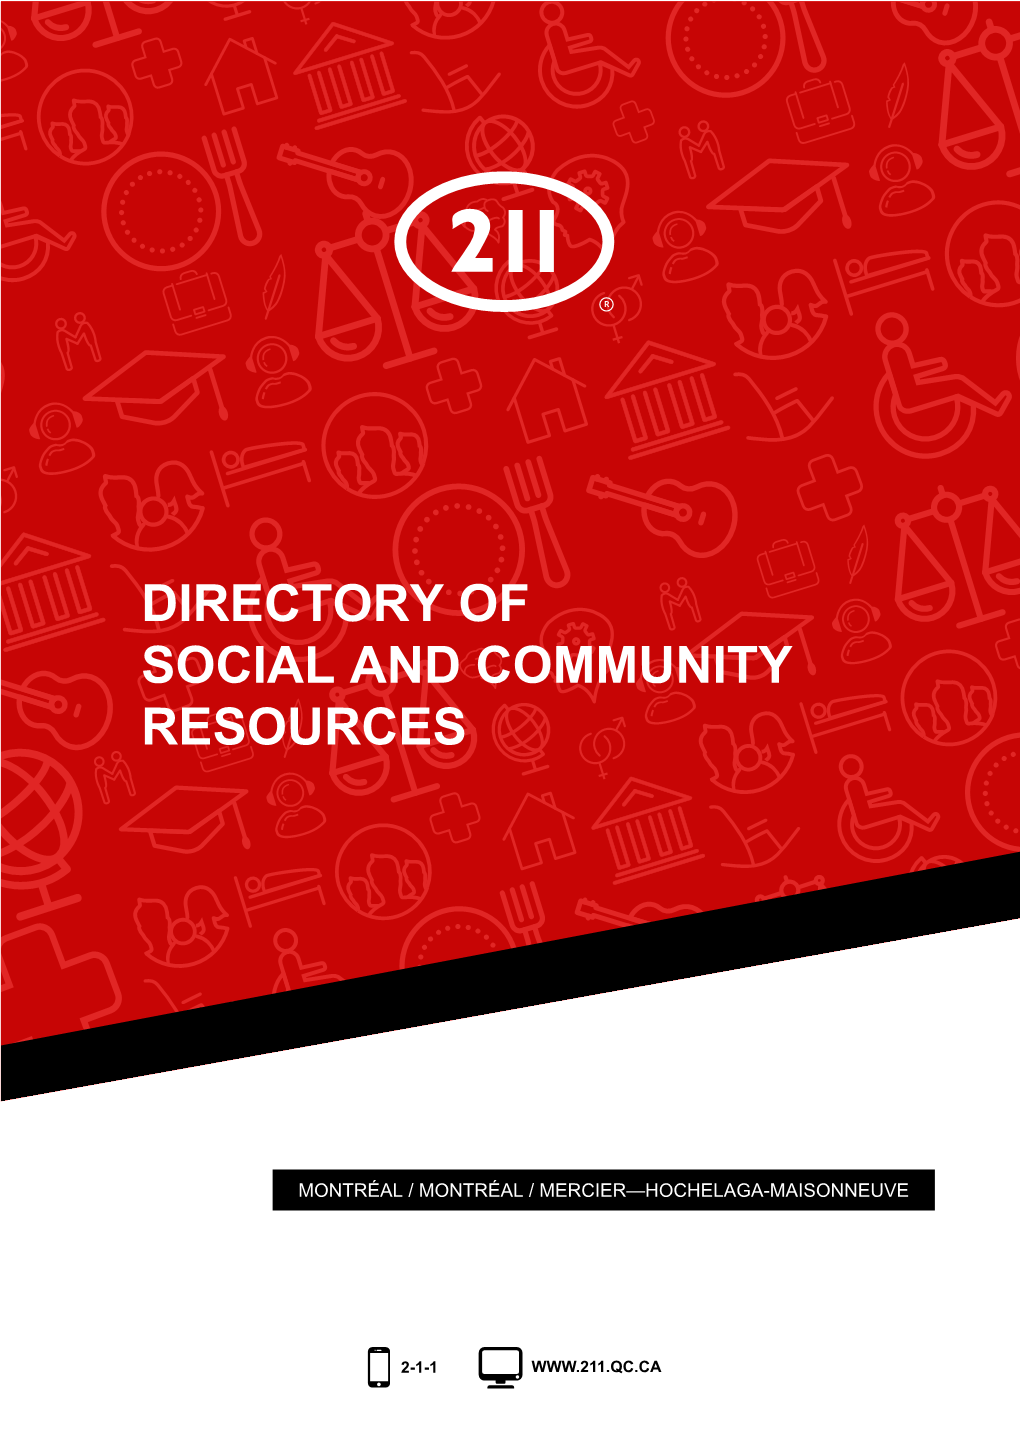 Directory of Social and Community Resources